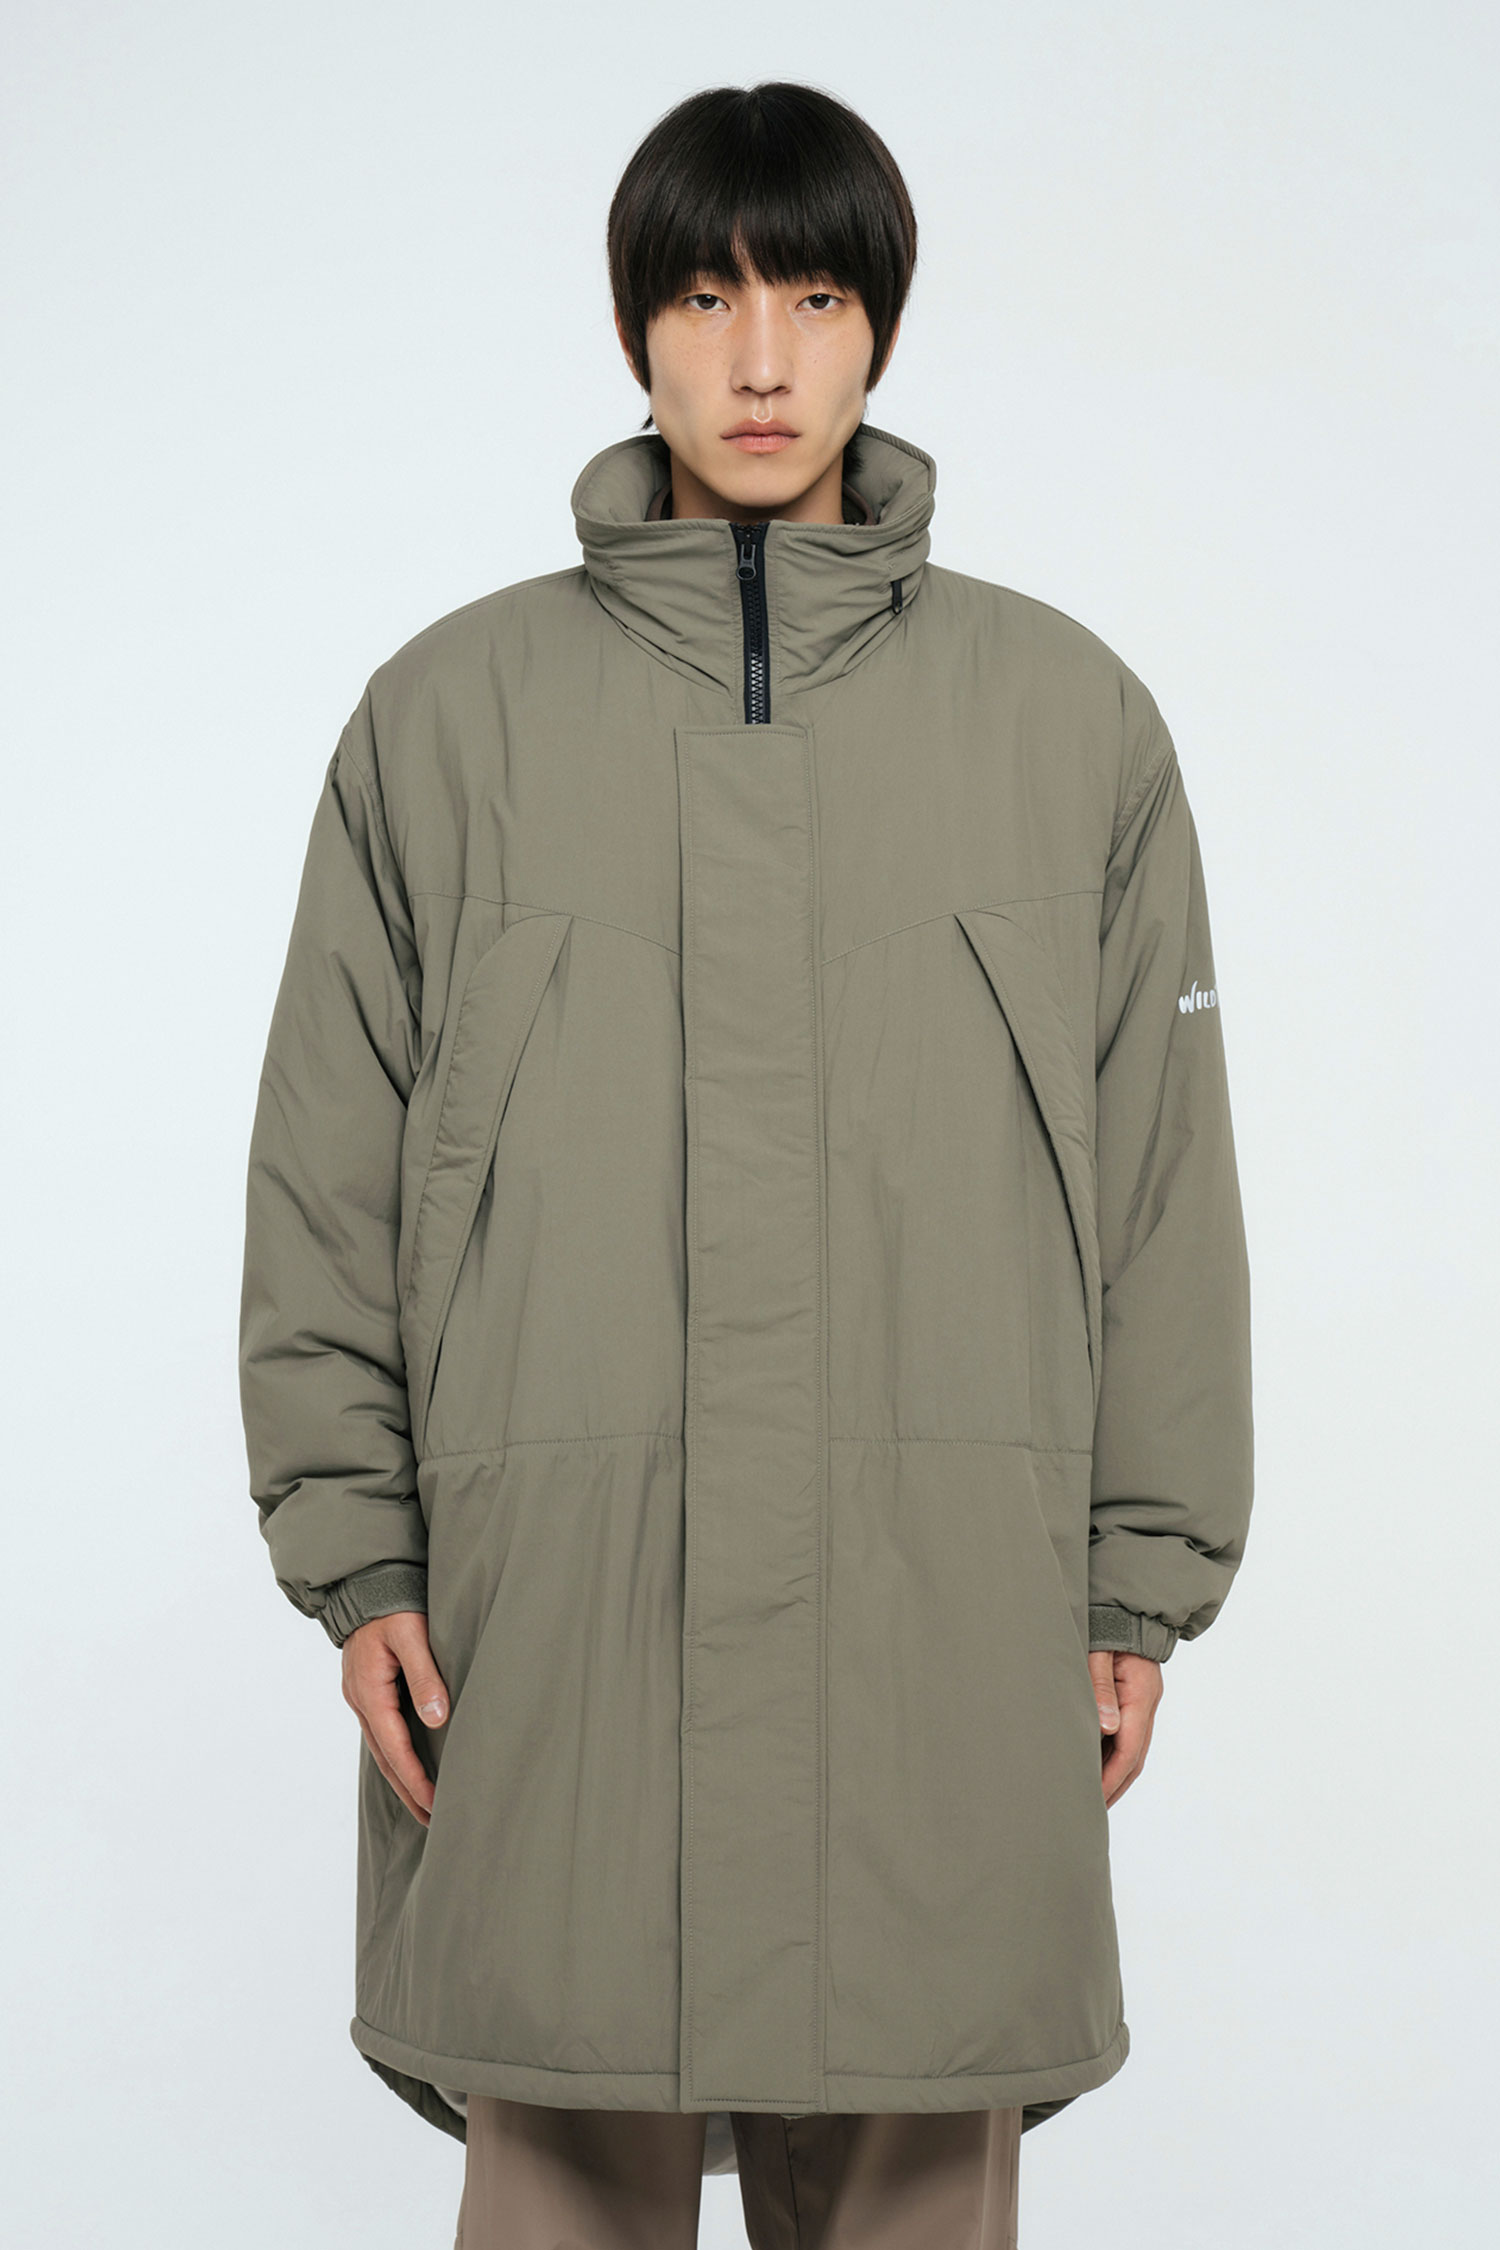 Wild Things x WDS Ready Parka-